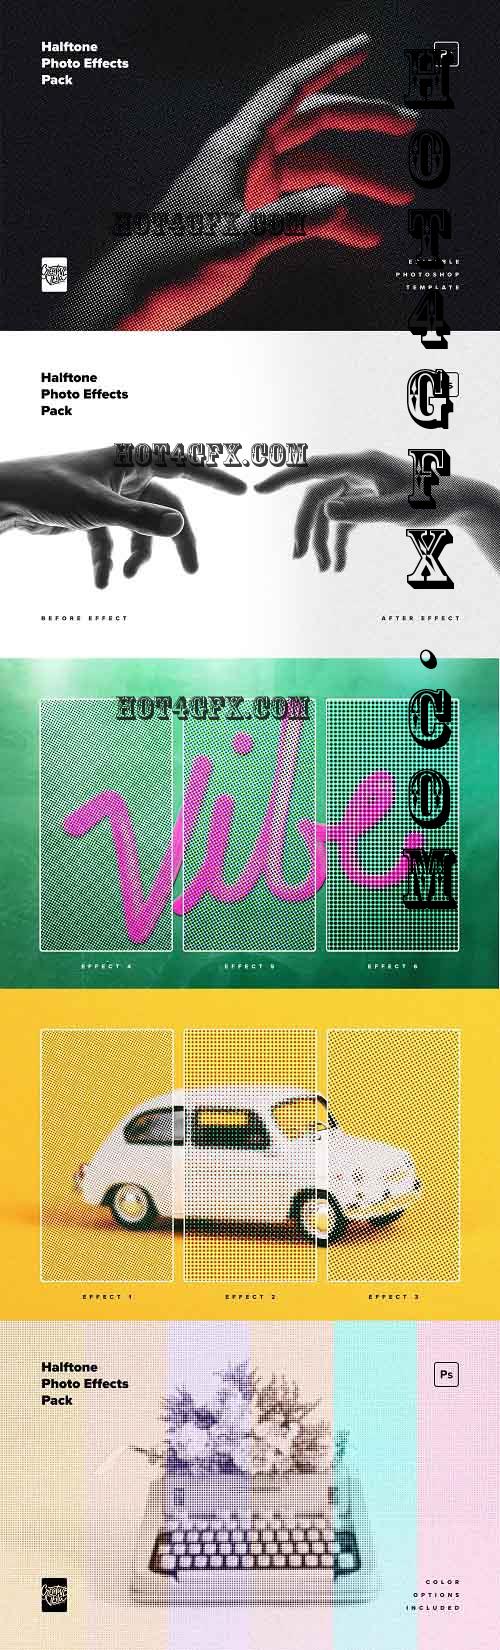 Halftone Photo Effects Pack - 7088600